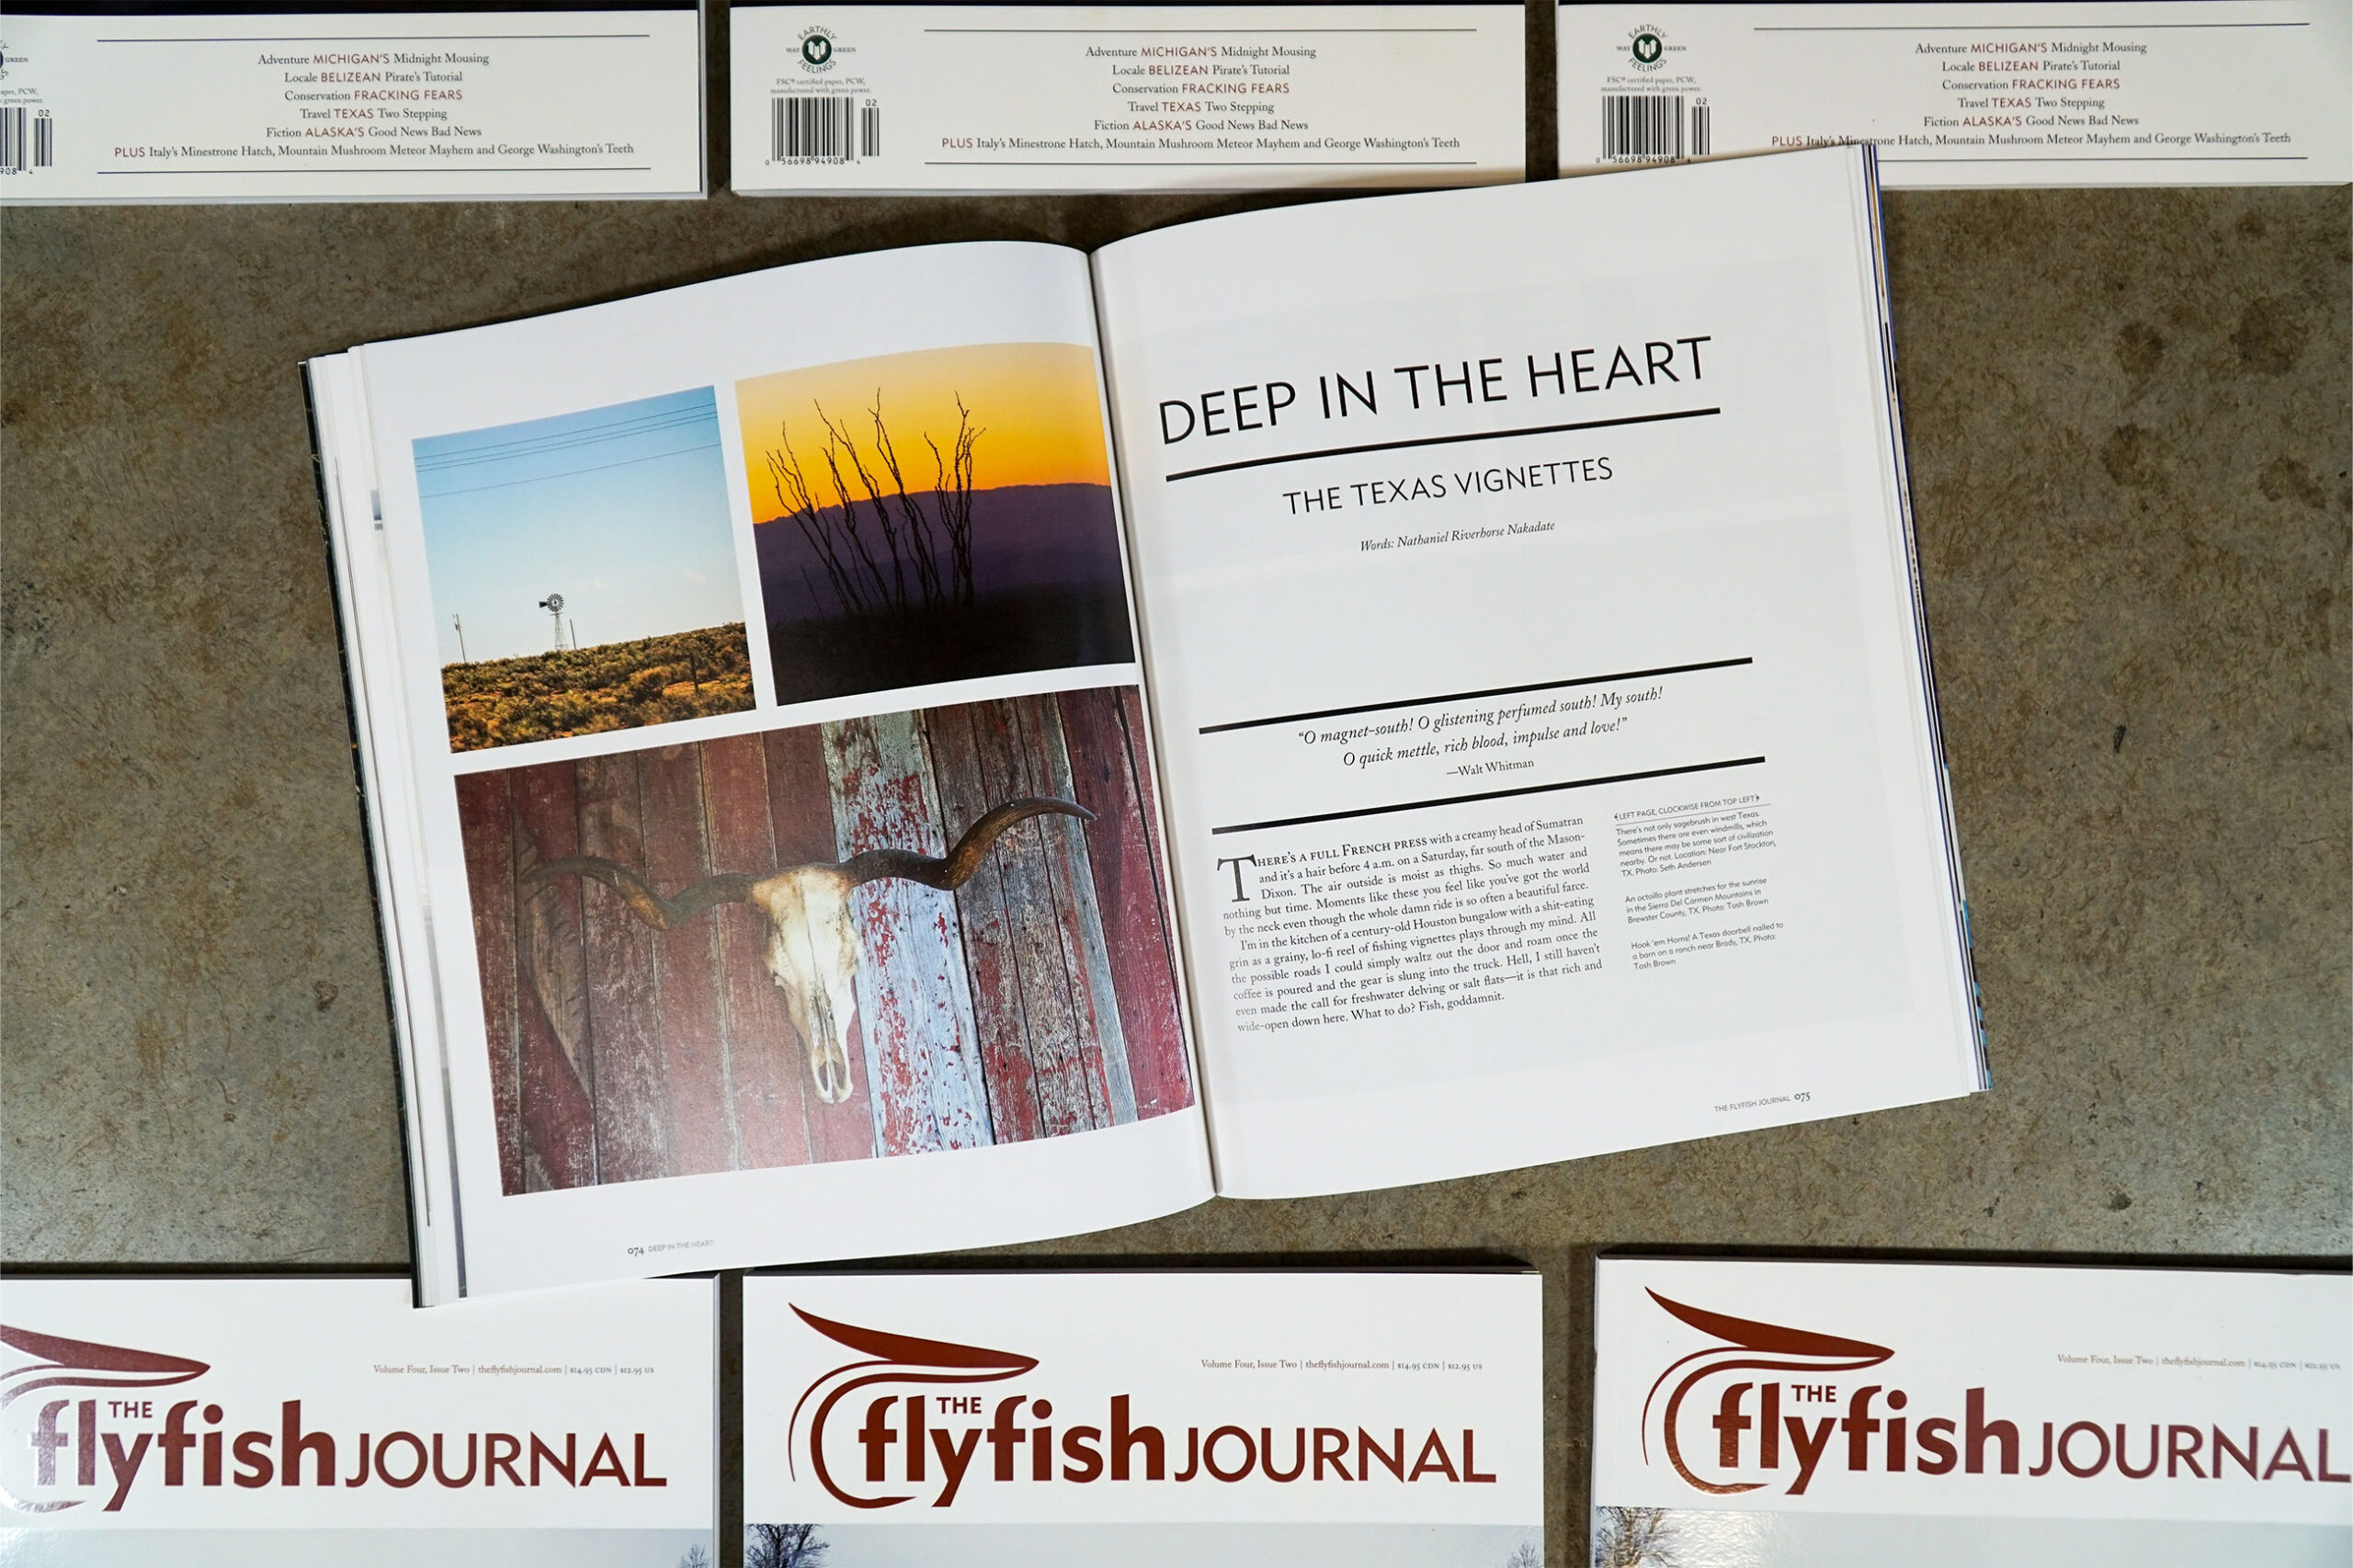 The Flyfish Journal Volume 4 Issue 2 Feature Deep in the Heart